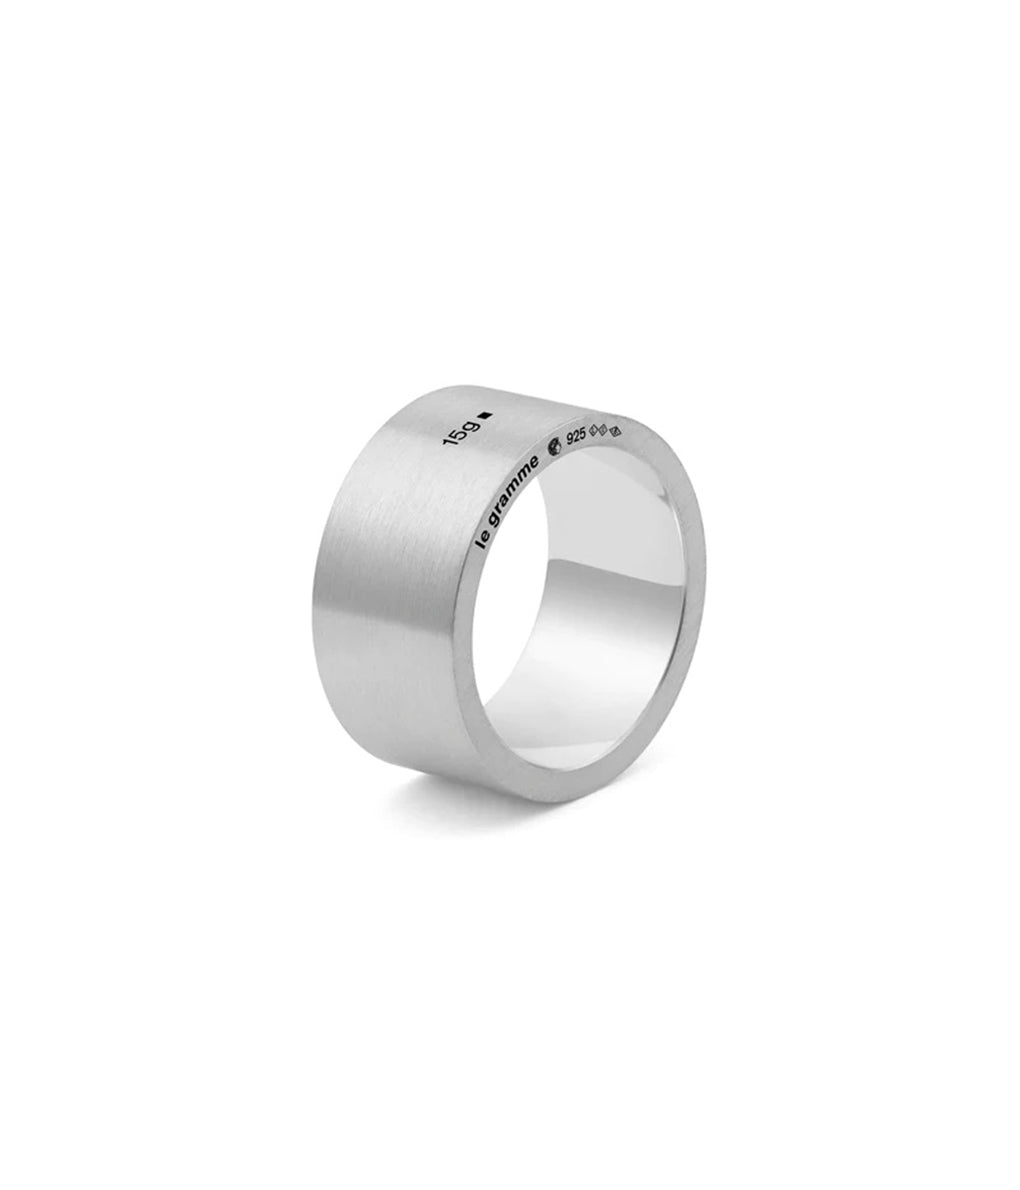 LE GRAMME "15G RIBBON RING BRUSHED"（NEW)